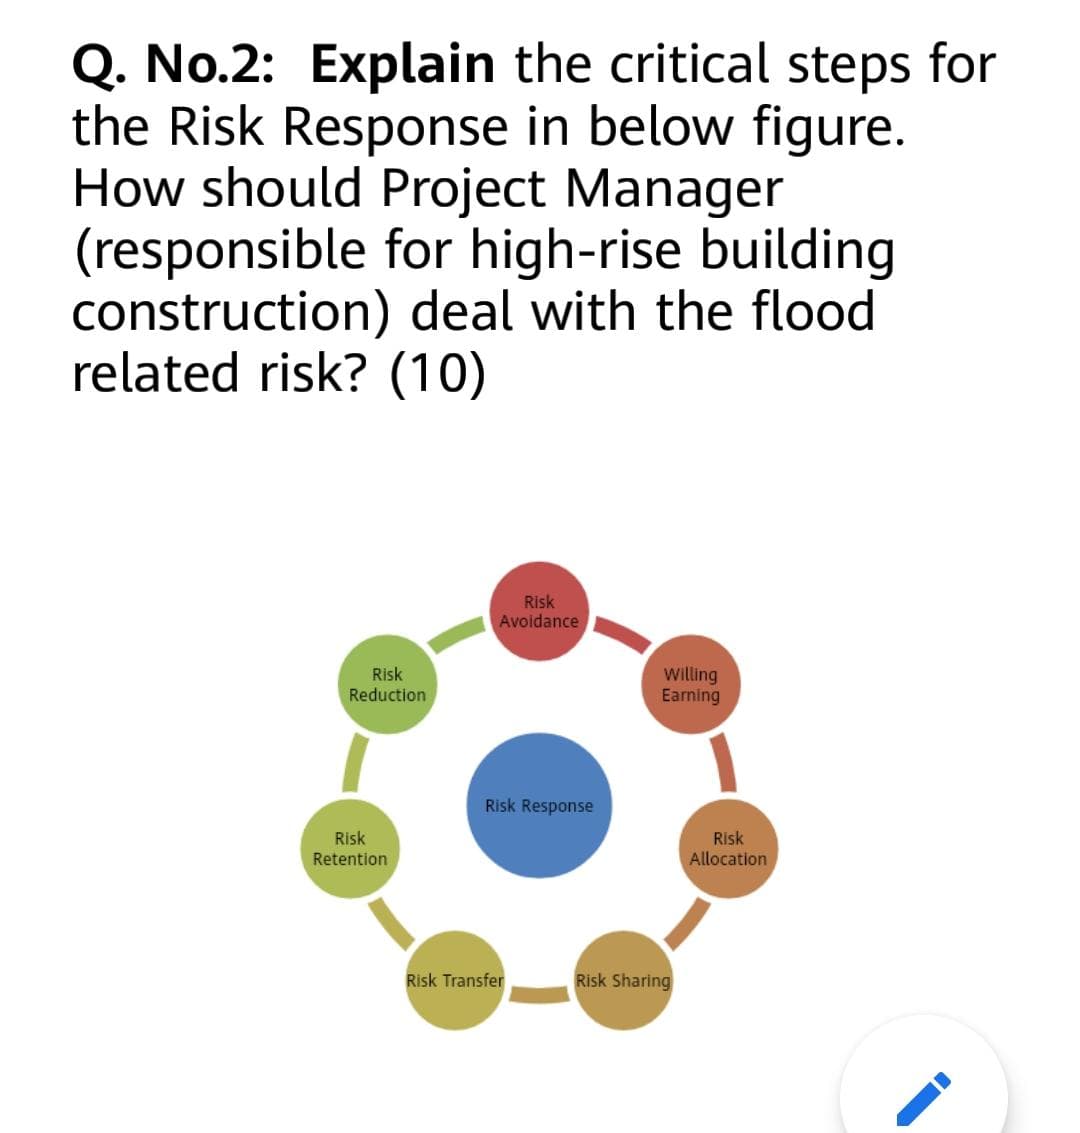 Q. No.2: Explain the critical steps for
the Risk Response in below figure.
How should Project Manager
(responsible for high-rise building
construction) deal with the flood
related risk? (10)
Risk
Avoidance
Risk
Reduction
Willing
Earning
Risk Response
Risk
Allocation
Risk
Retention
Risk Transfer
Risk Sharing
